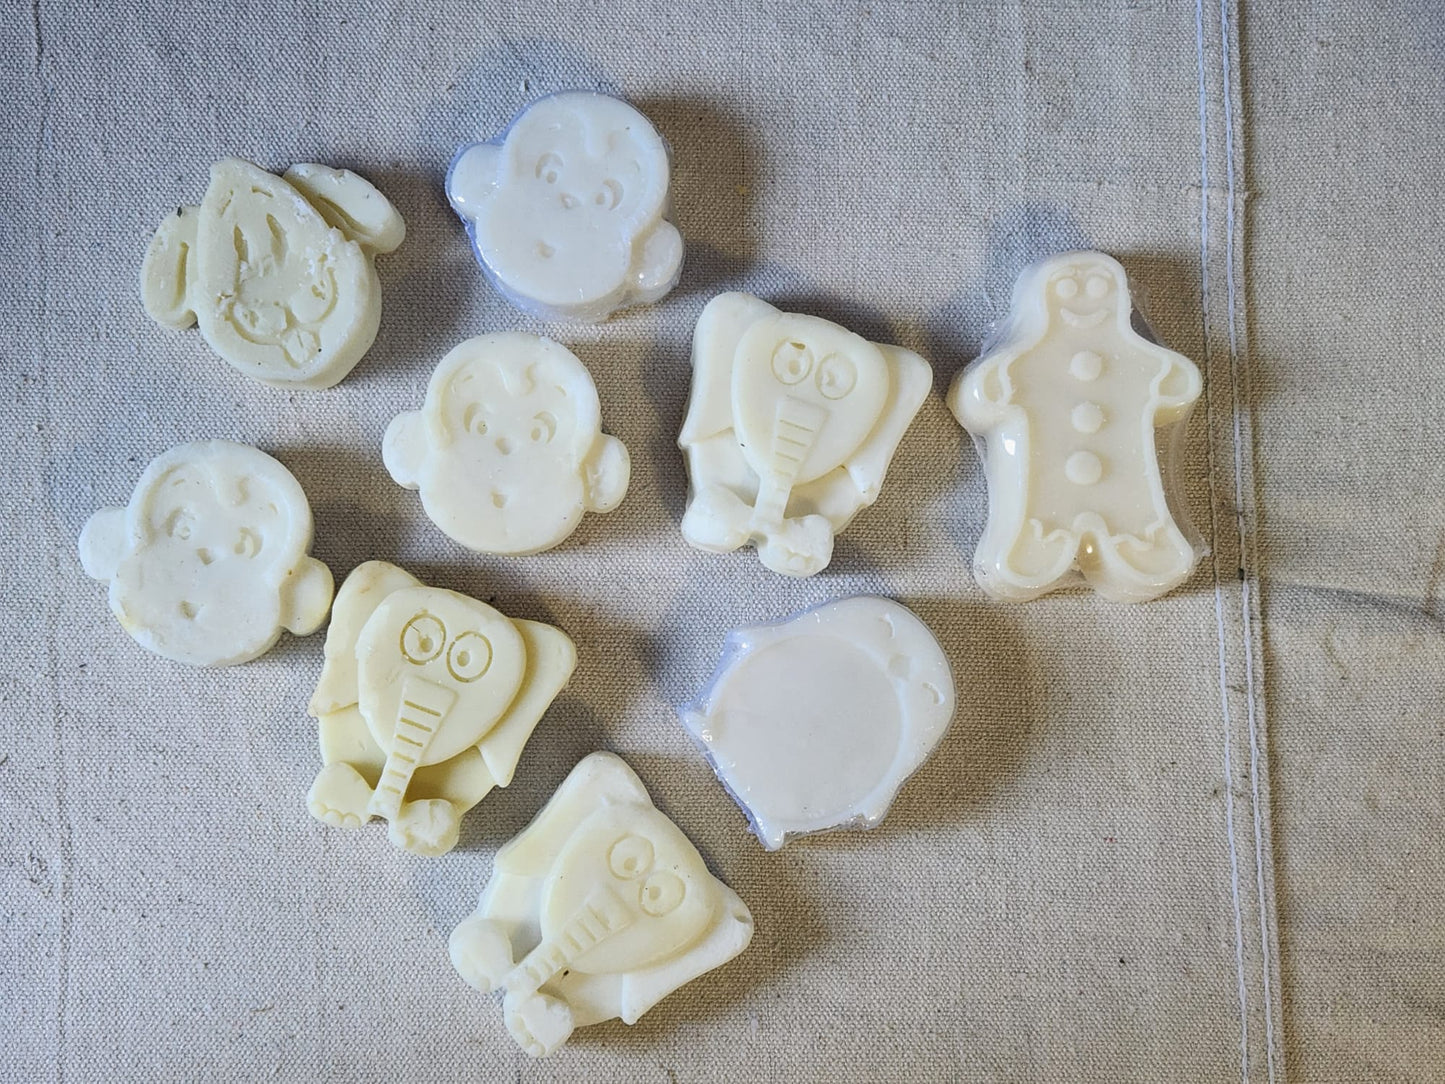 Imperfect Kids Soaps